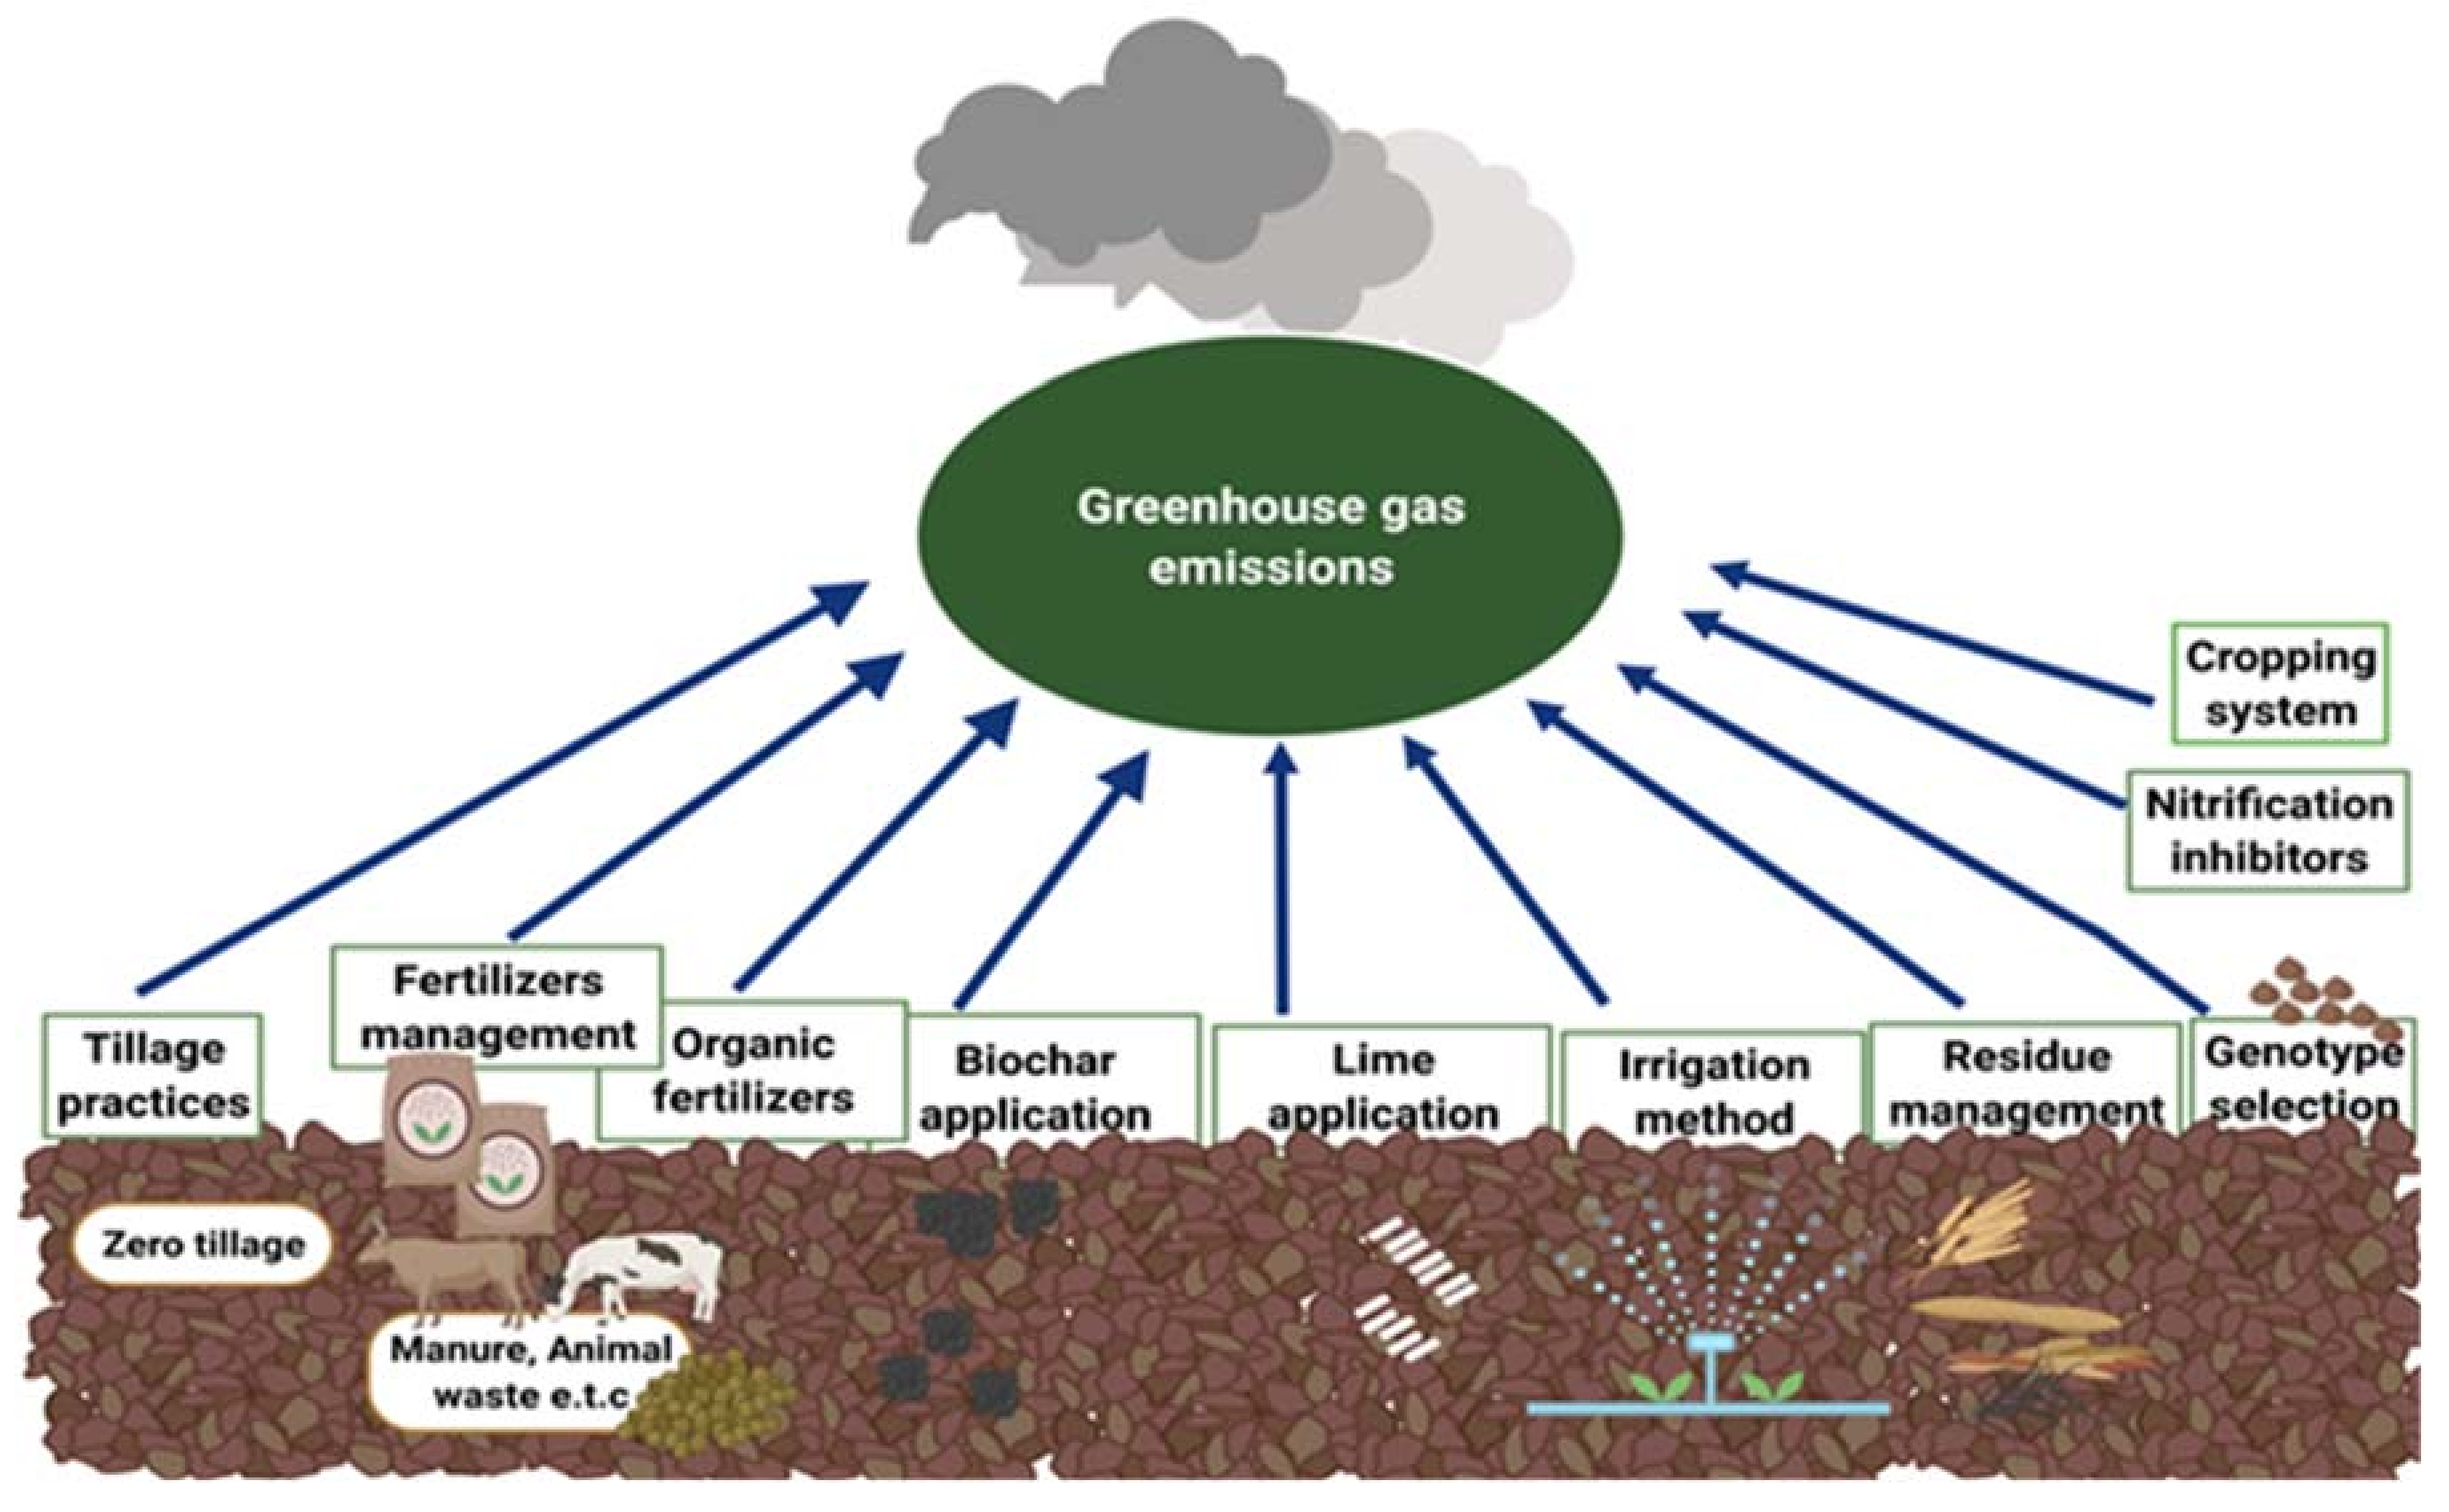 GHG Emissions Tracking at Smith College